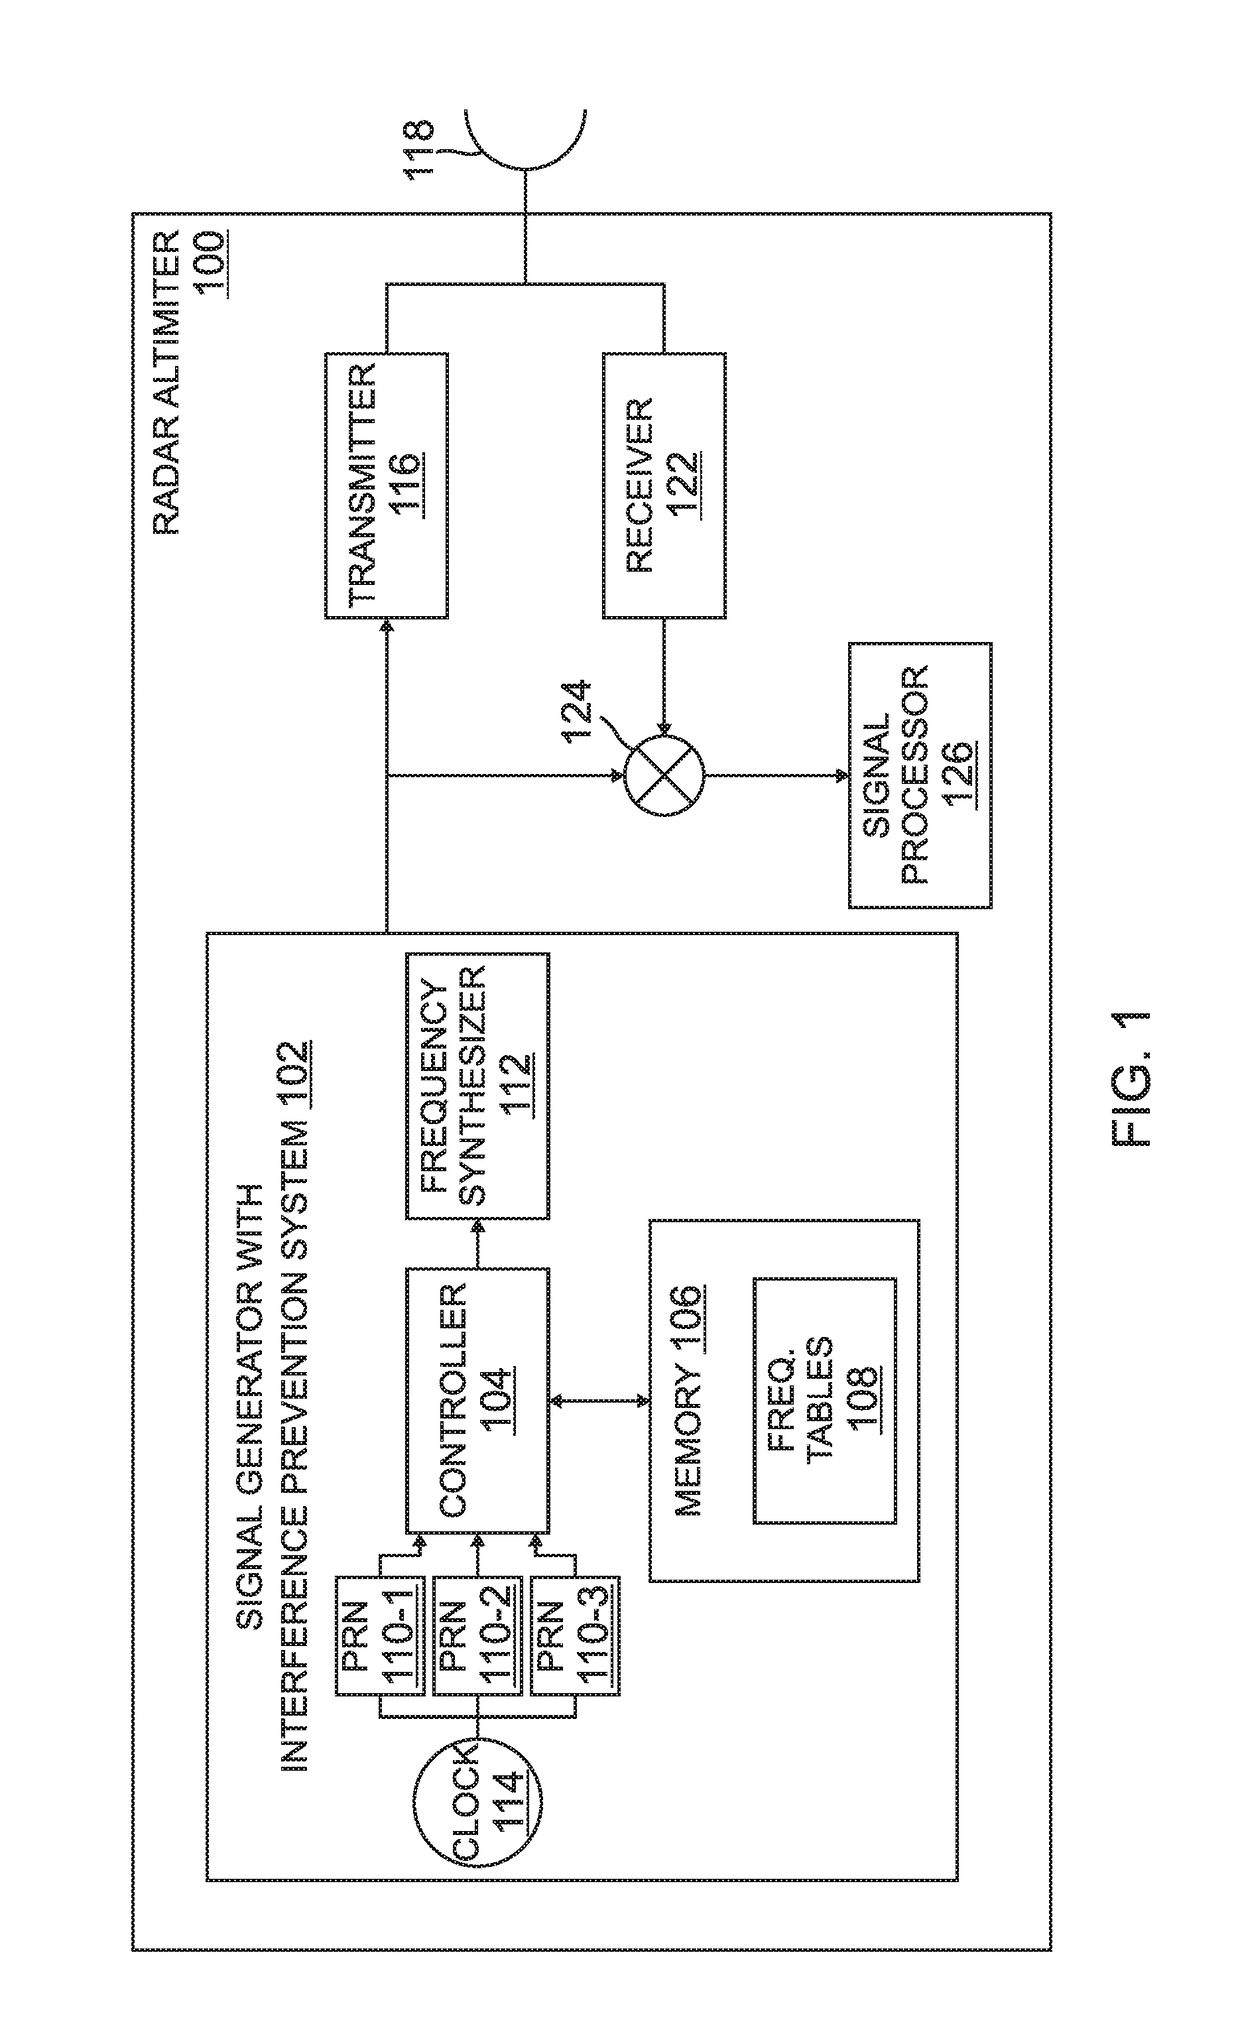 Signal interference prevention system for a frequency-modulated continuous wave radar altimeter